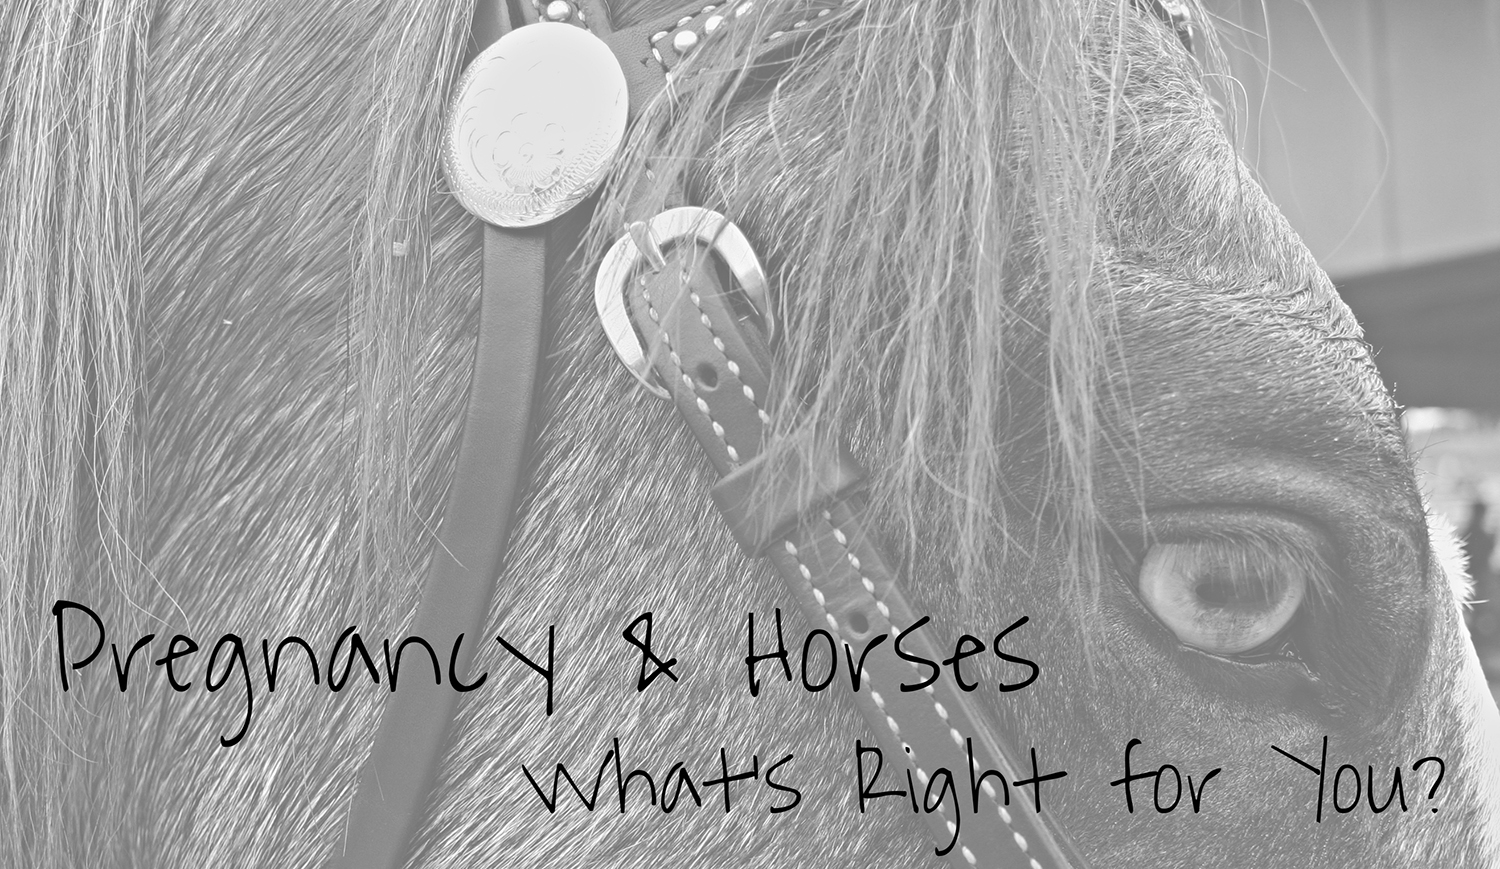 Pregnancy and Horses. What's right for you?